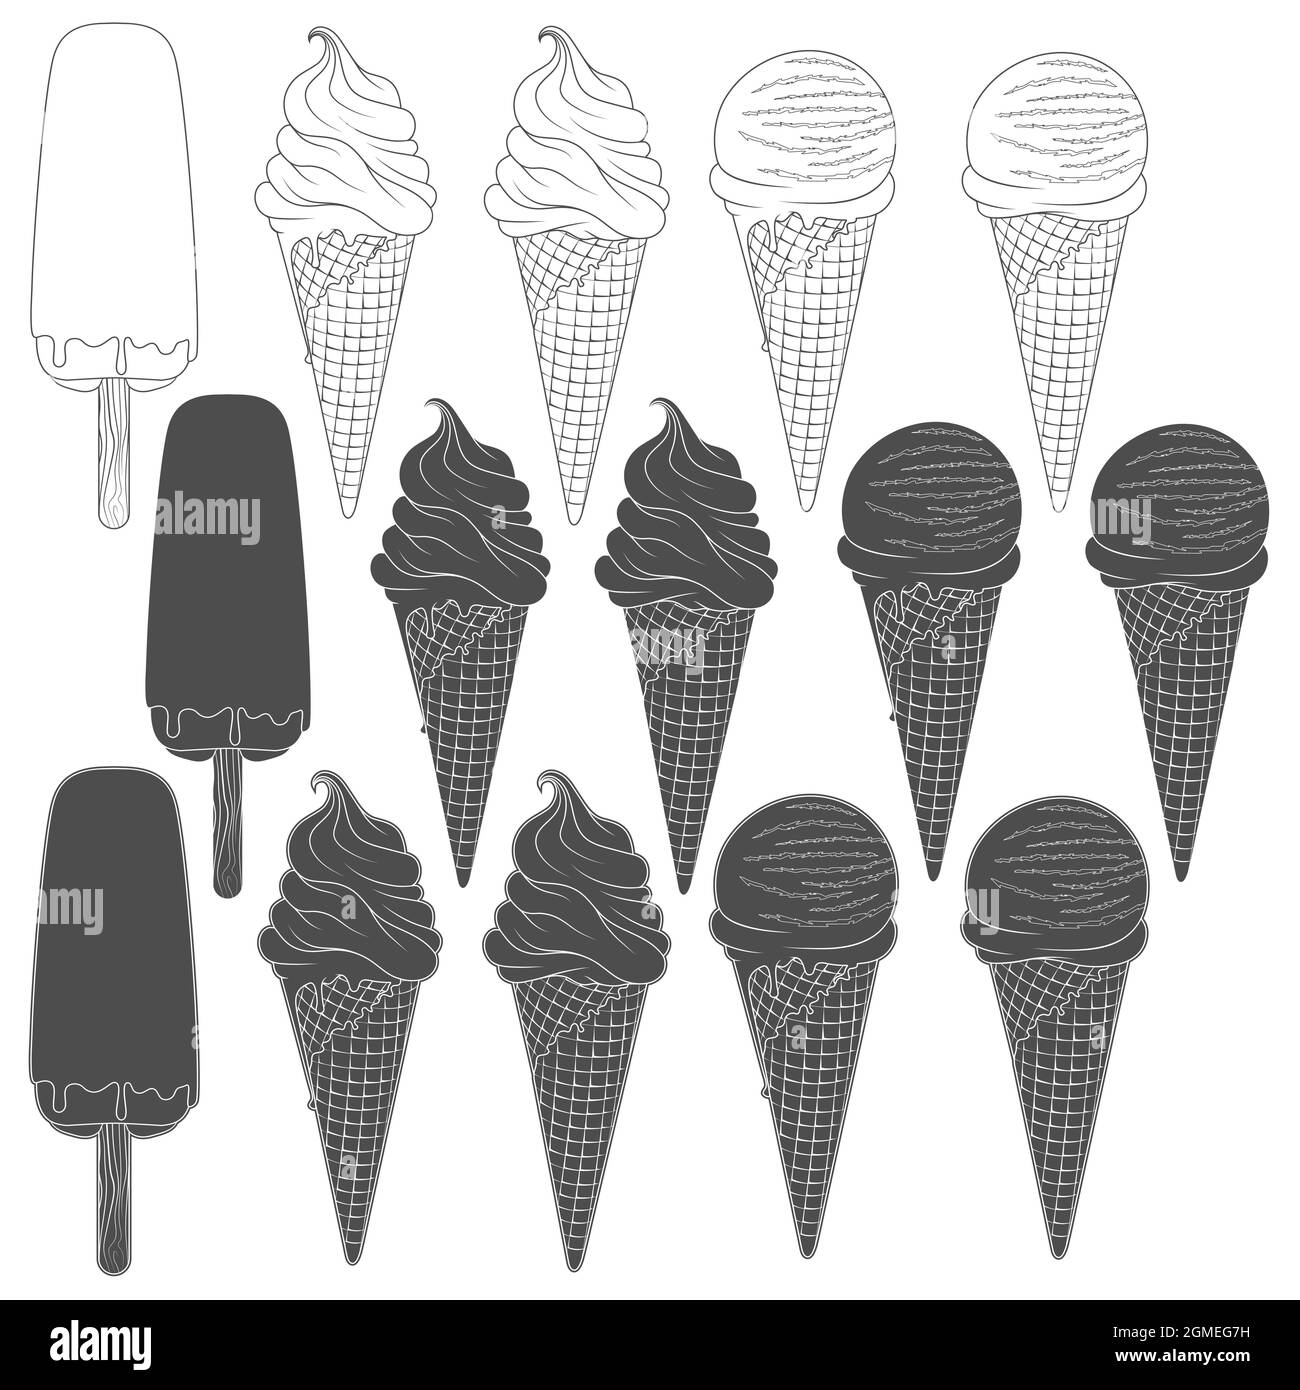 Set of black and white illustrations with ice cream. Isolated vector objects on white background. Stock Vector